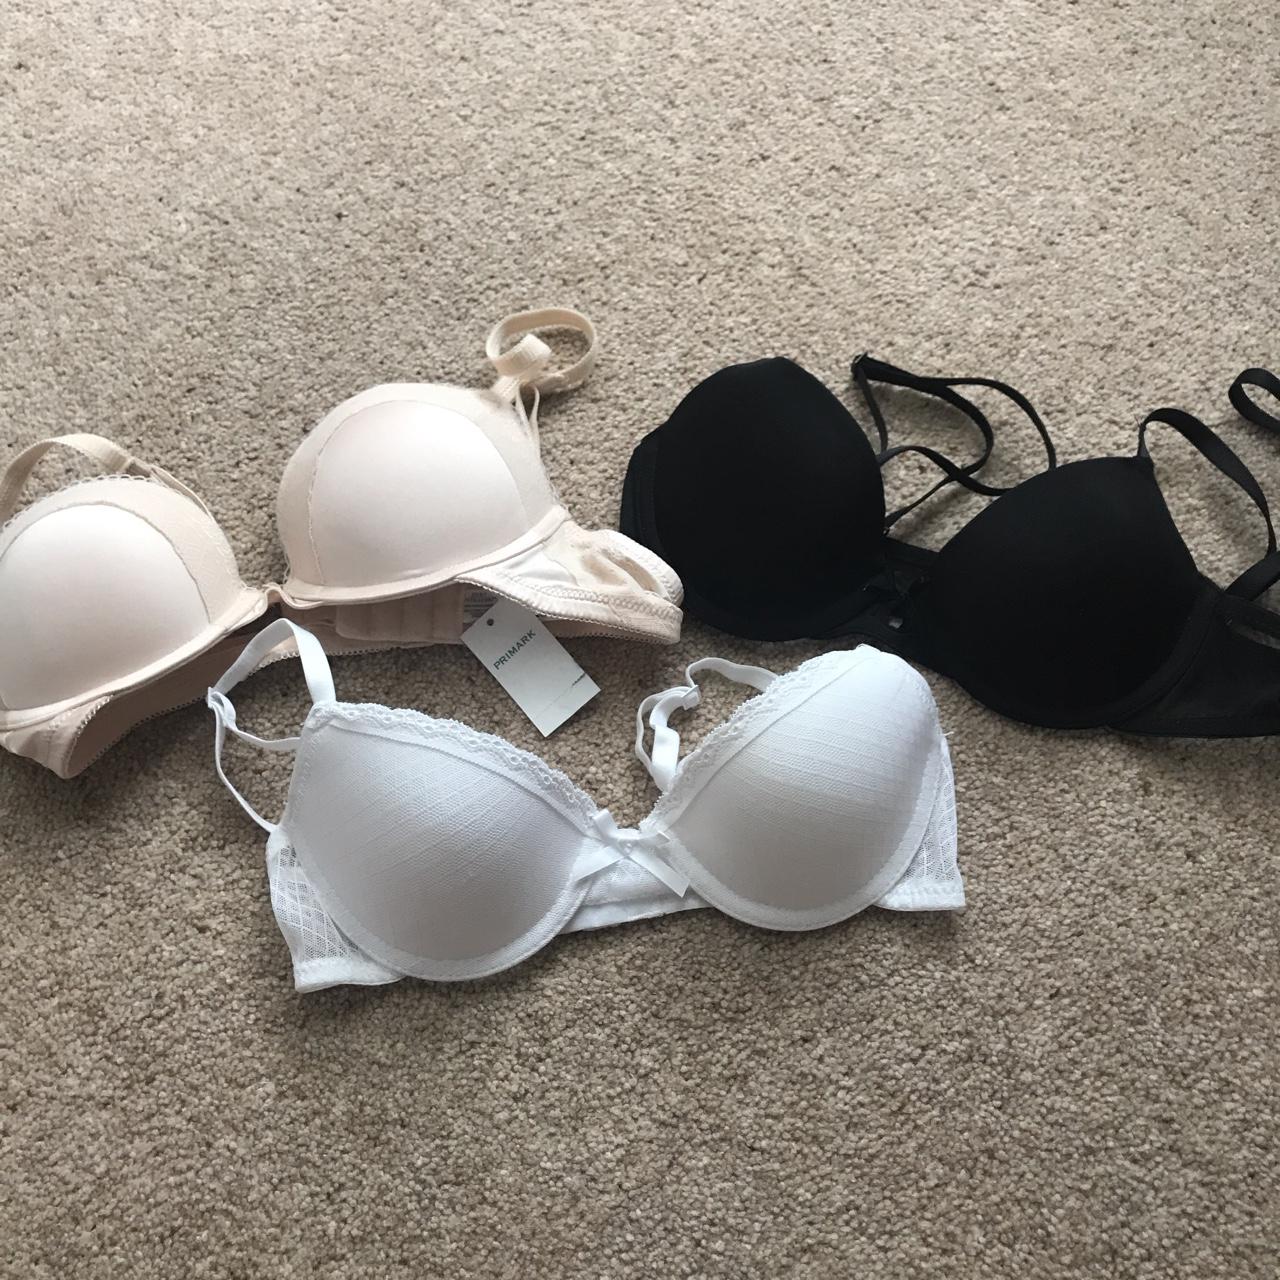 Primark Bras Nude One Brand New With Tags, Primark Bralette Set